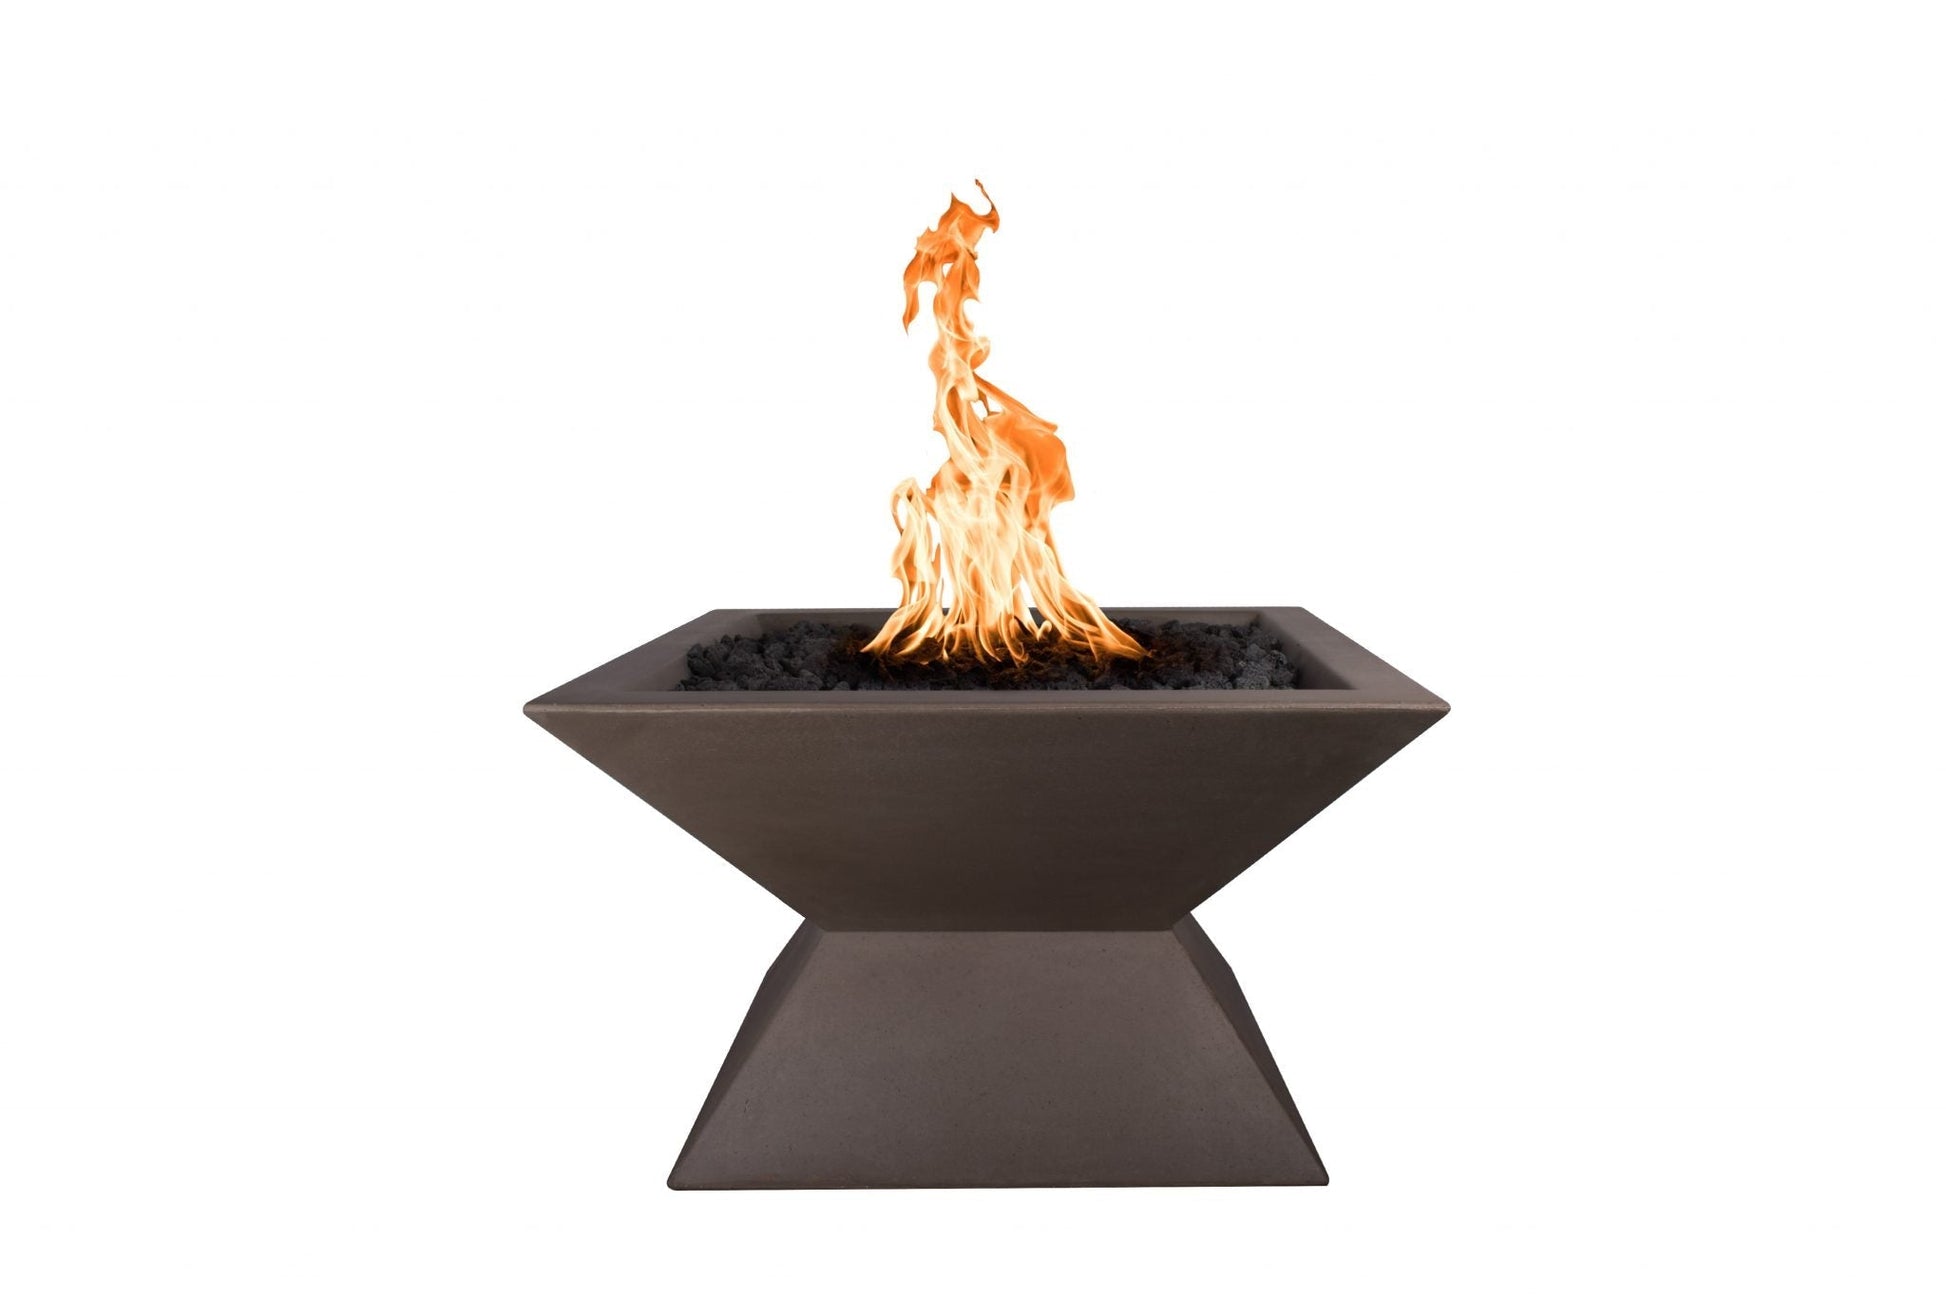 The Outdoor Plus Square Uxmal 30" Brown GFRC Concrete Liquid Propane Fire Pit with Match Lit Ignition